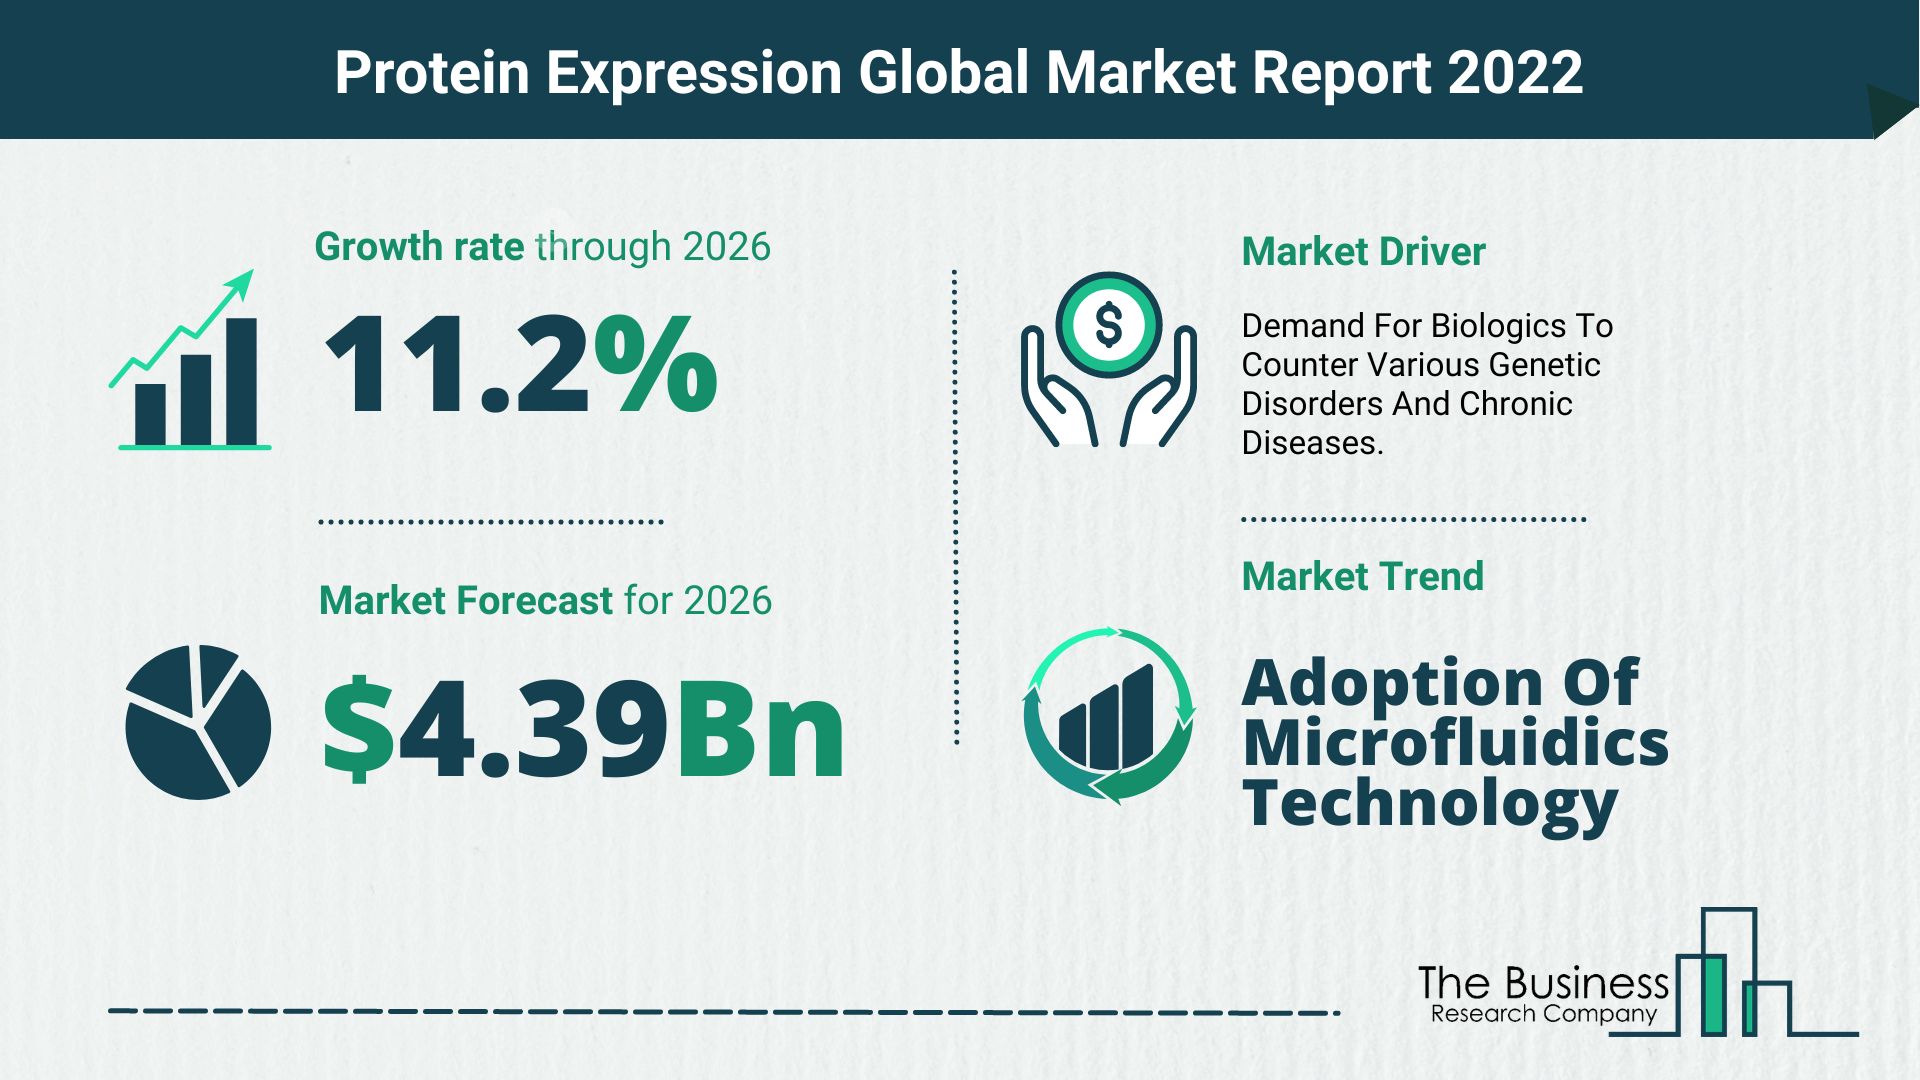 How Will The Protein Expression Market Grow In 2022?